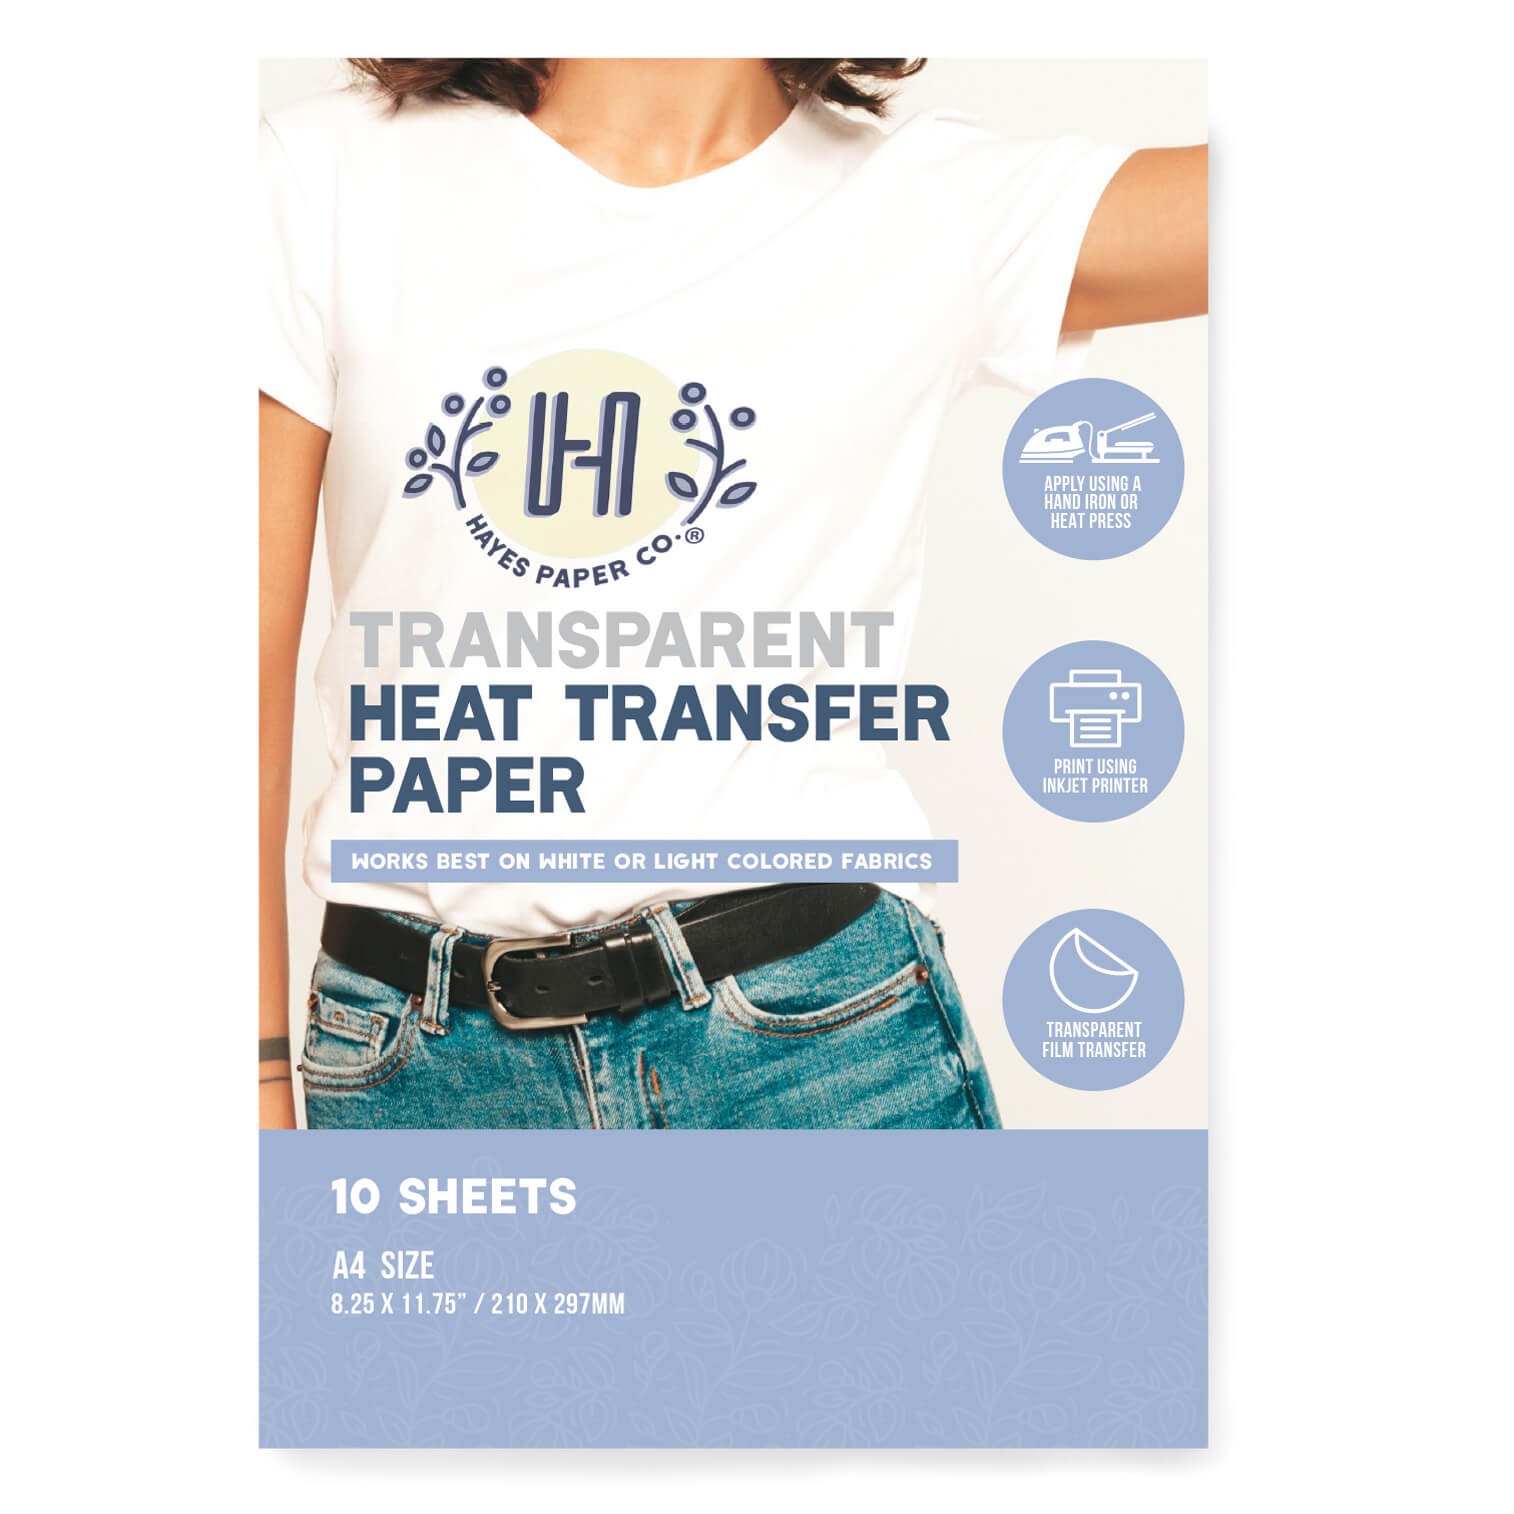 Hayes Paper Co. Transparent Heat Transfer Paper